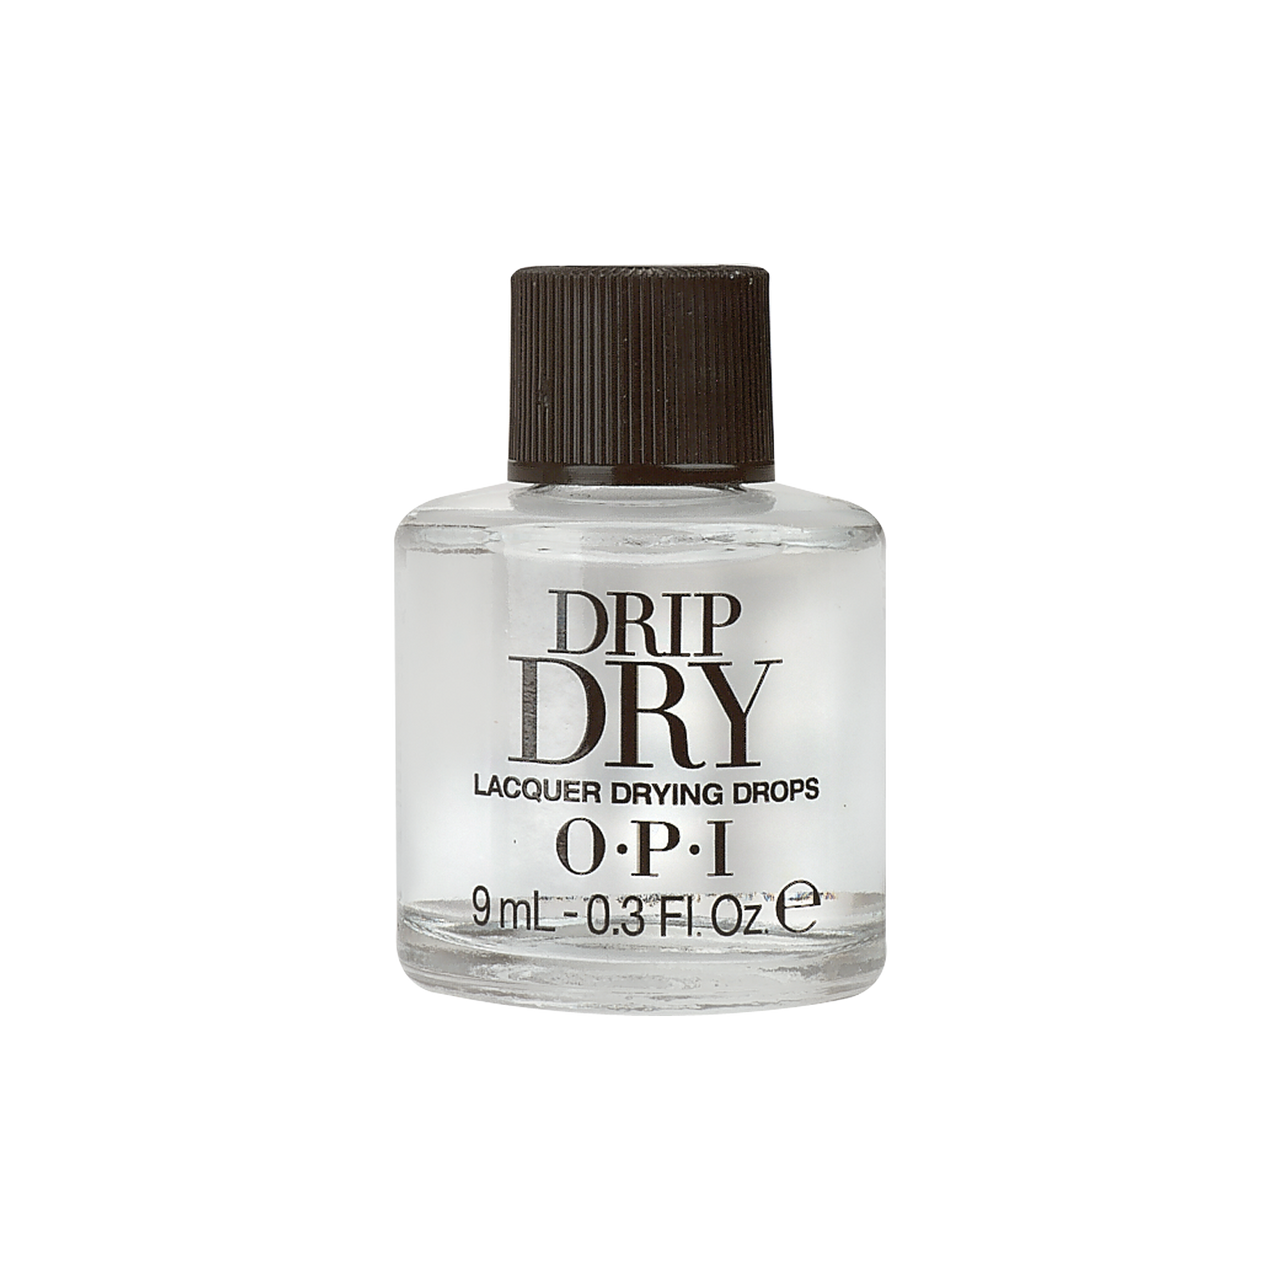 OPI Drip Dry Lacquer Drying Drops .3 fl oz